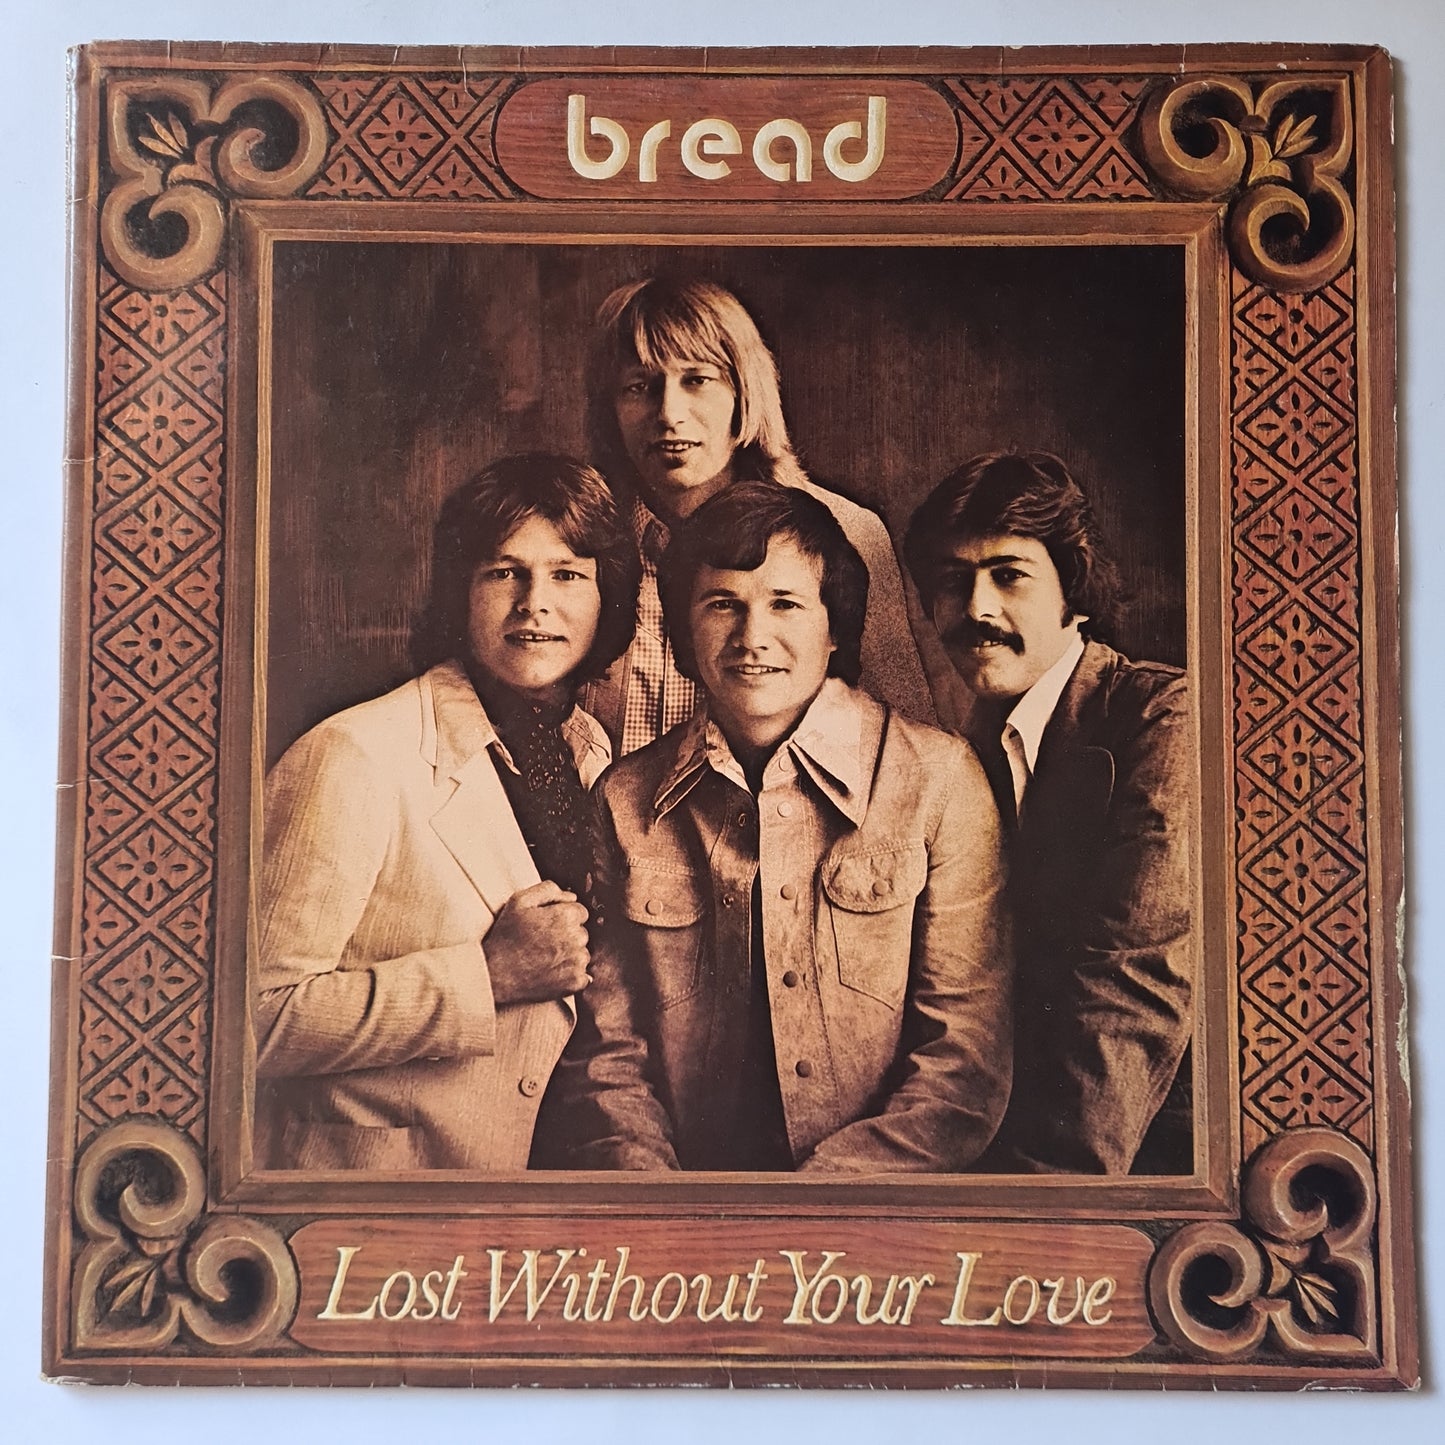 Bread – Lost Without Your Love - 1977 - Vinyl Record